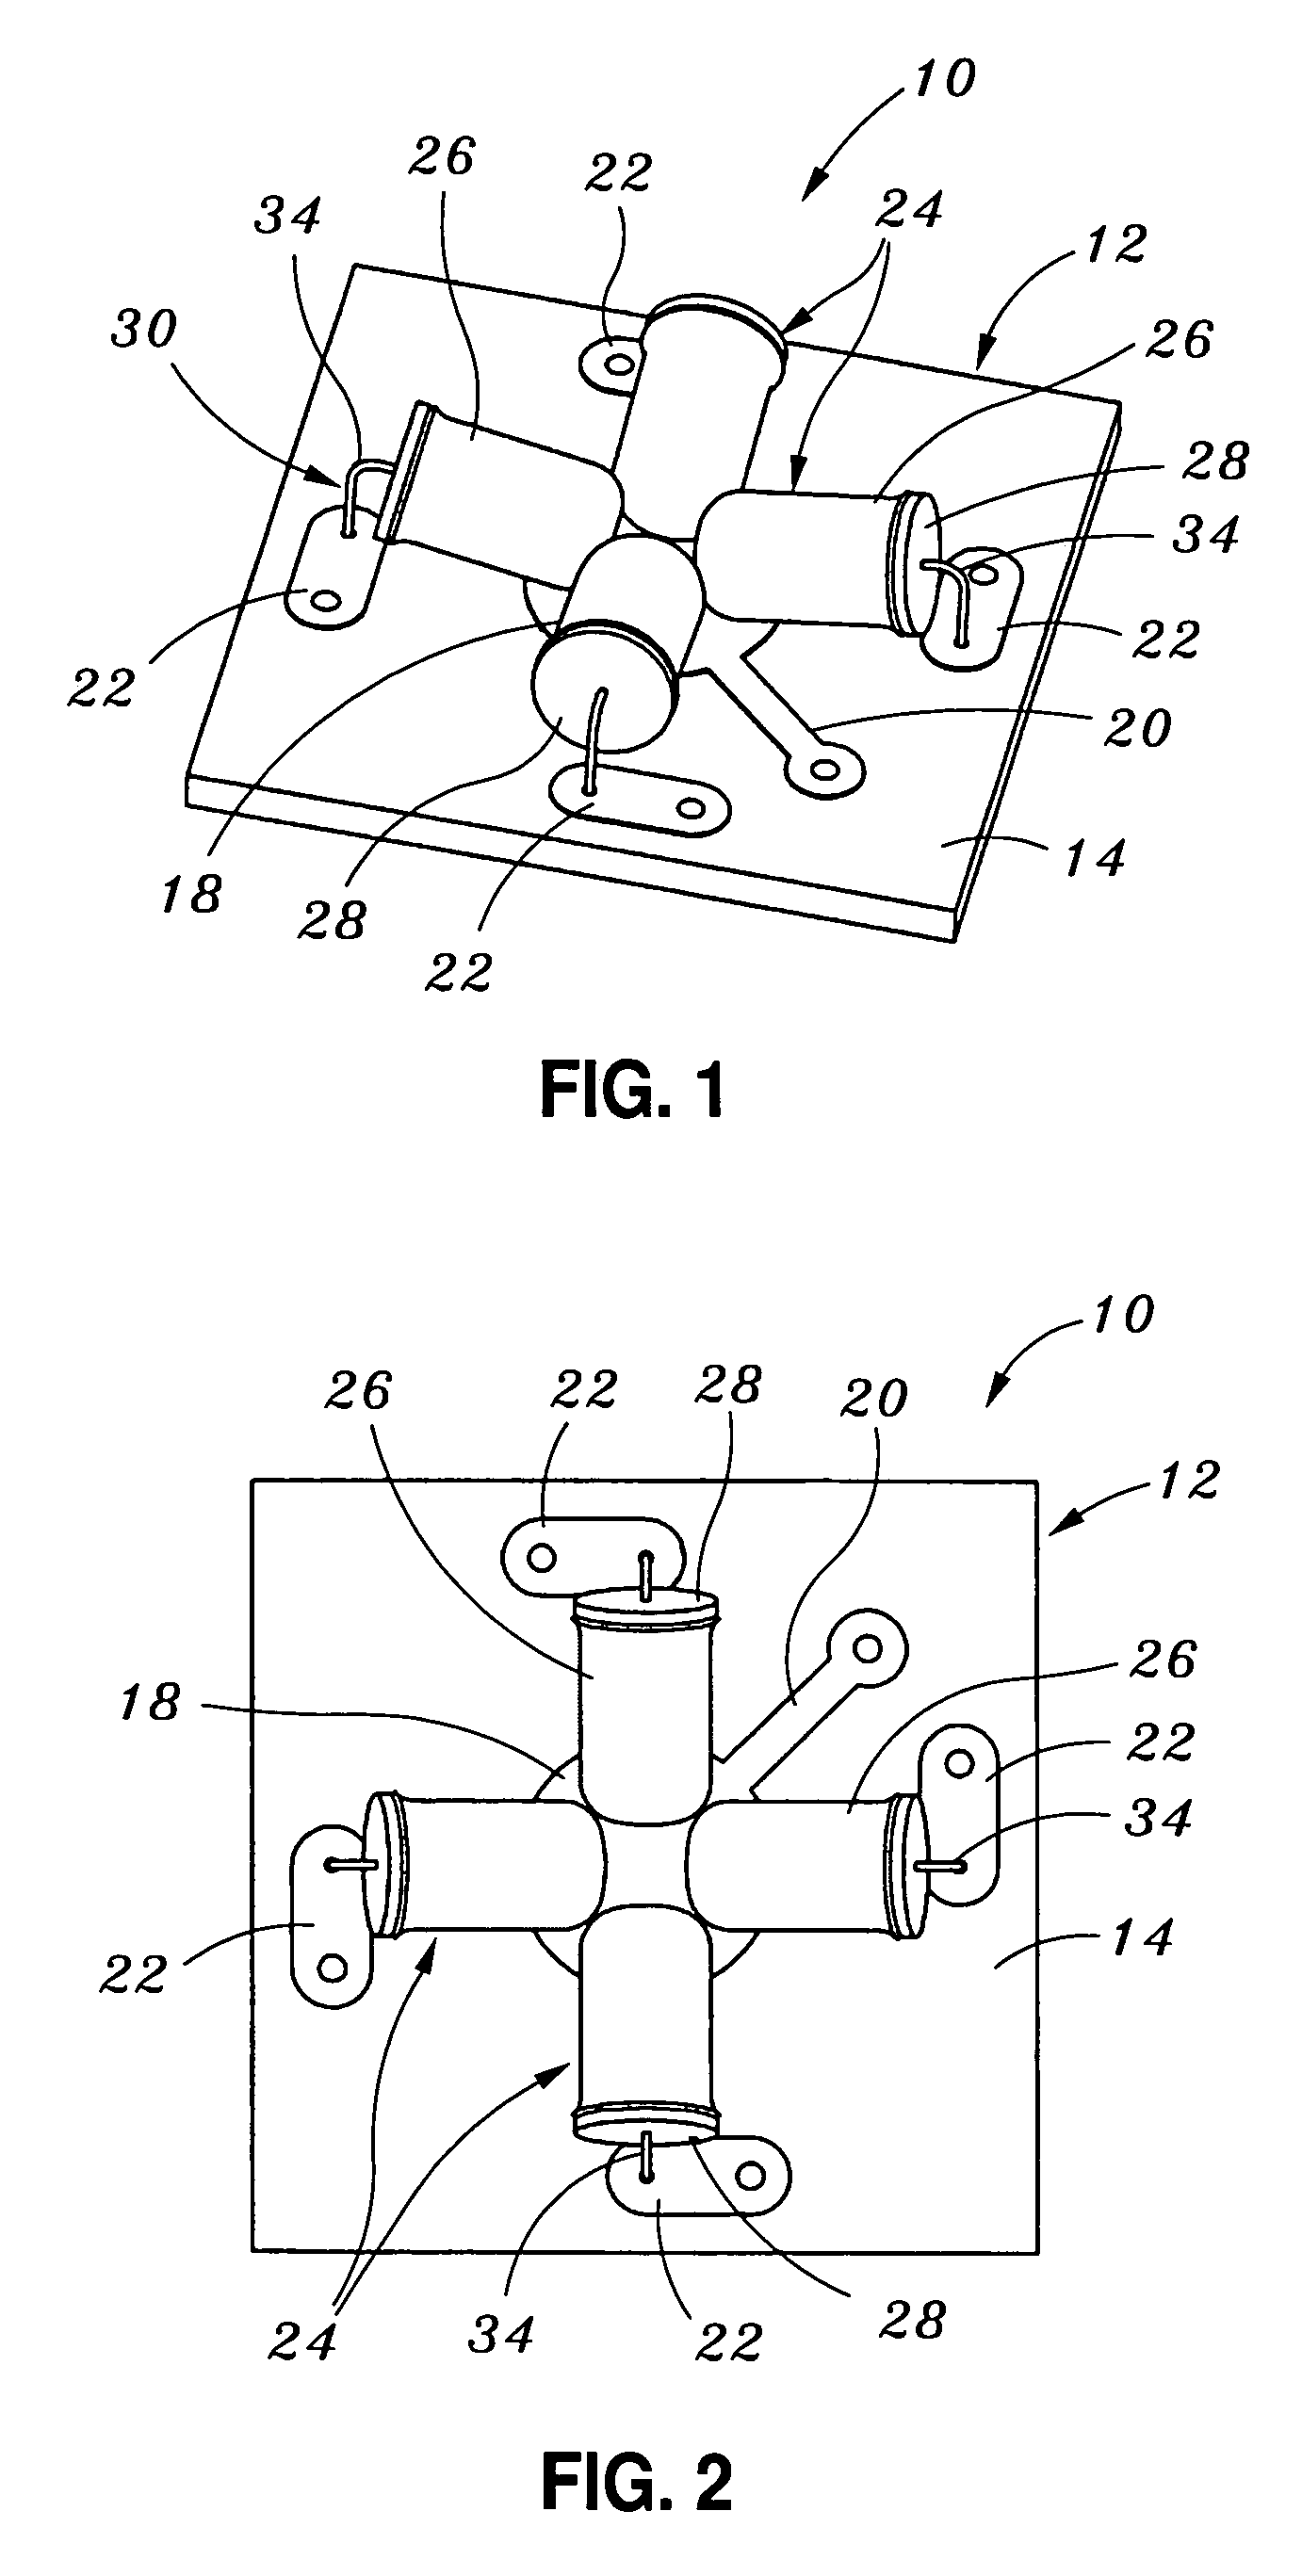 Level/position sensor and related electronic circuitry for interactive toy